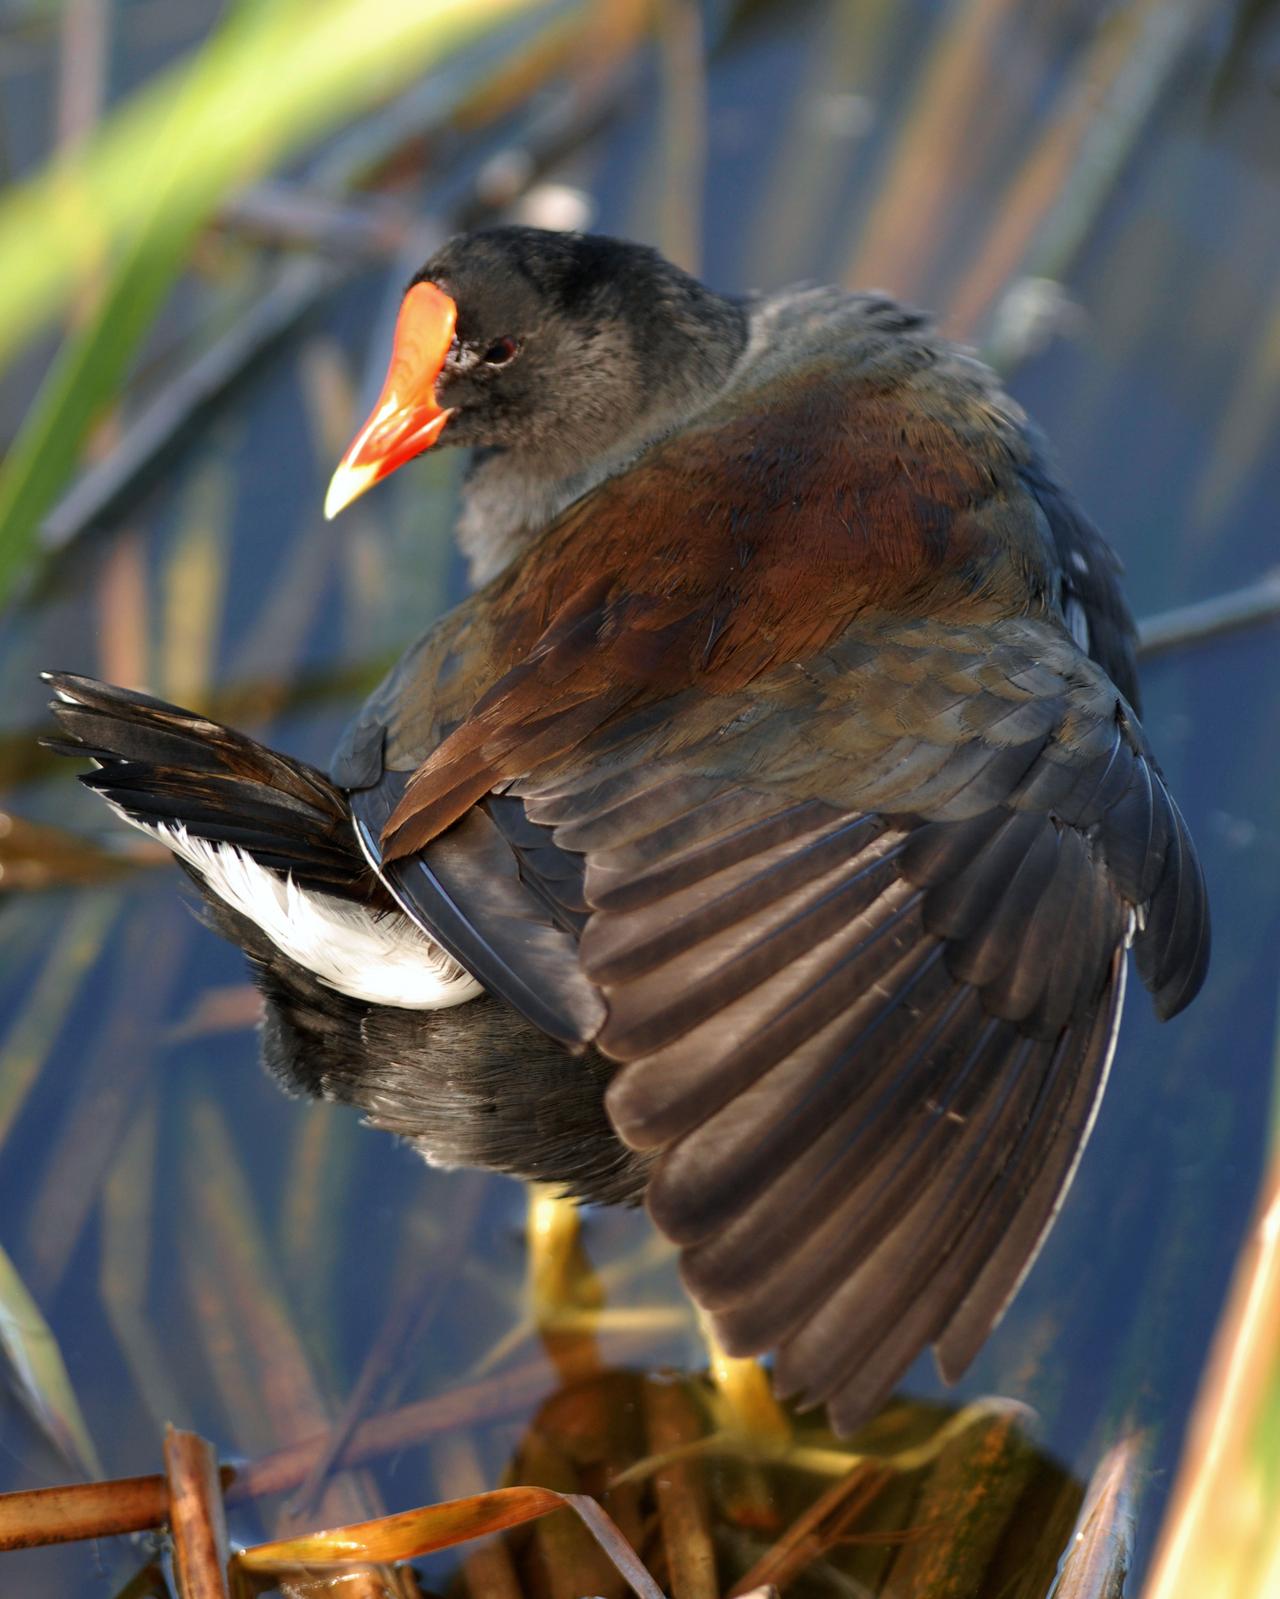 Common Gallinule Photo by David Hollie